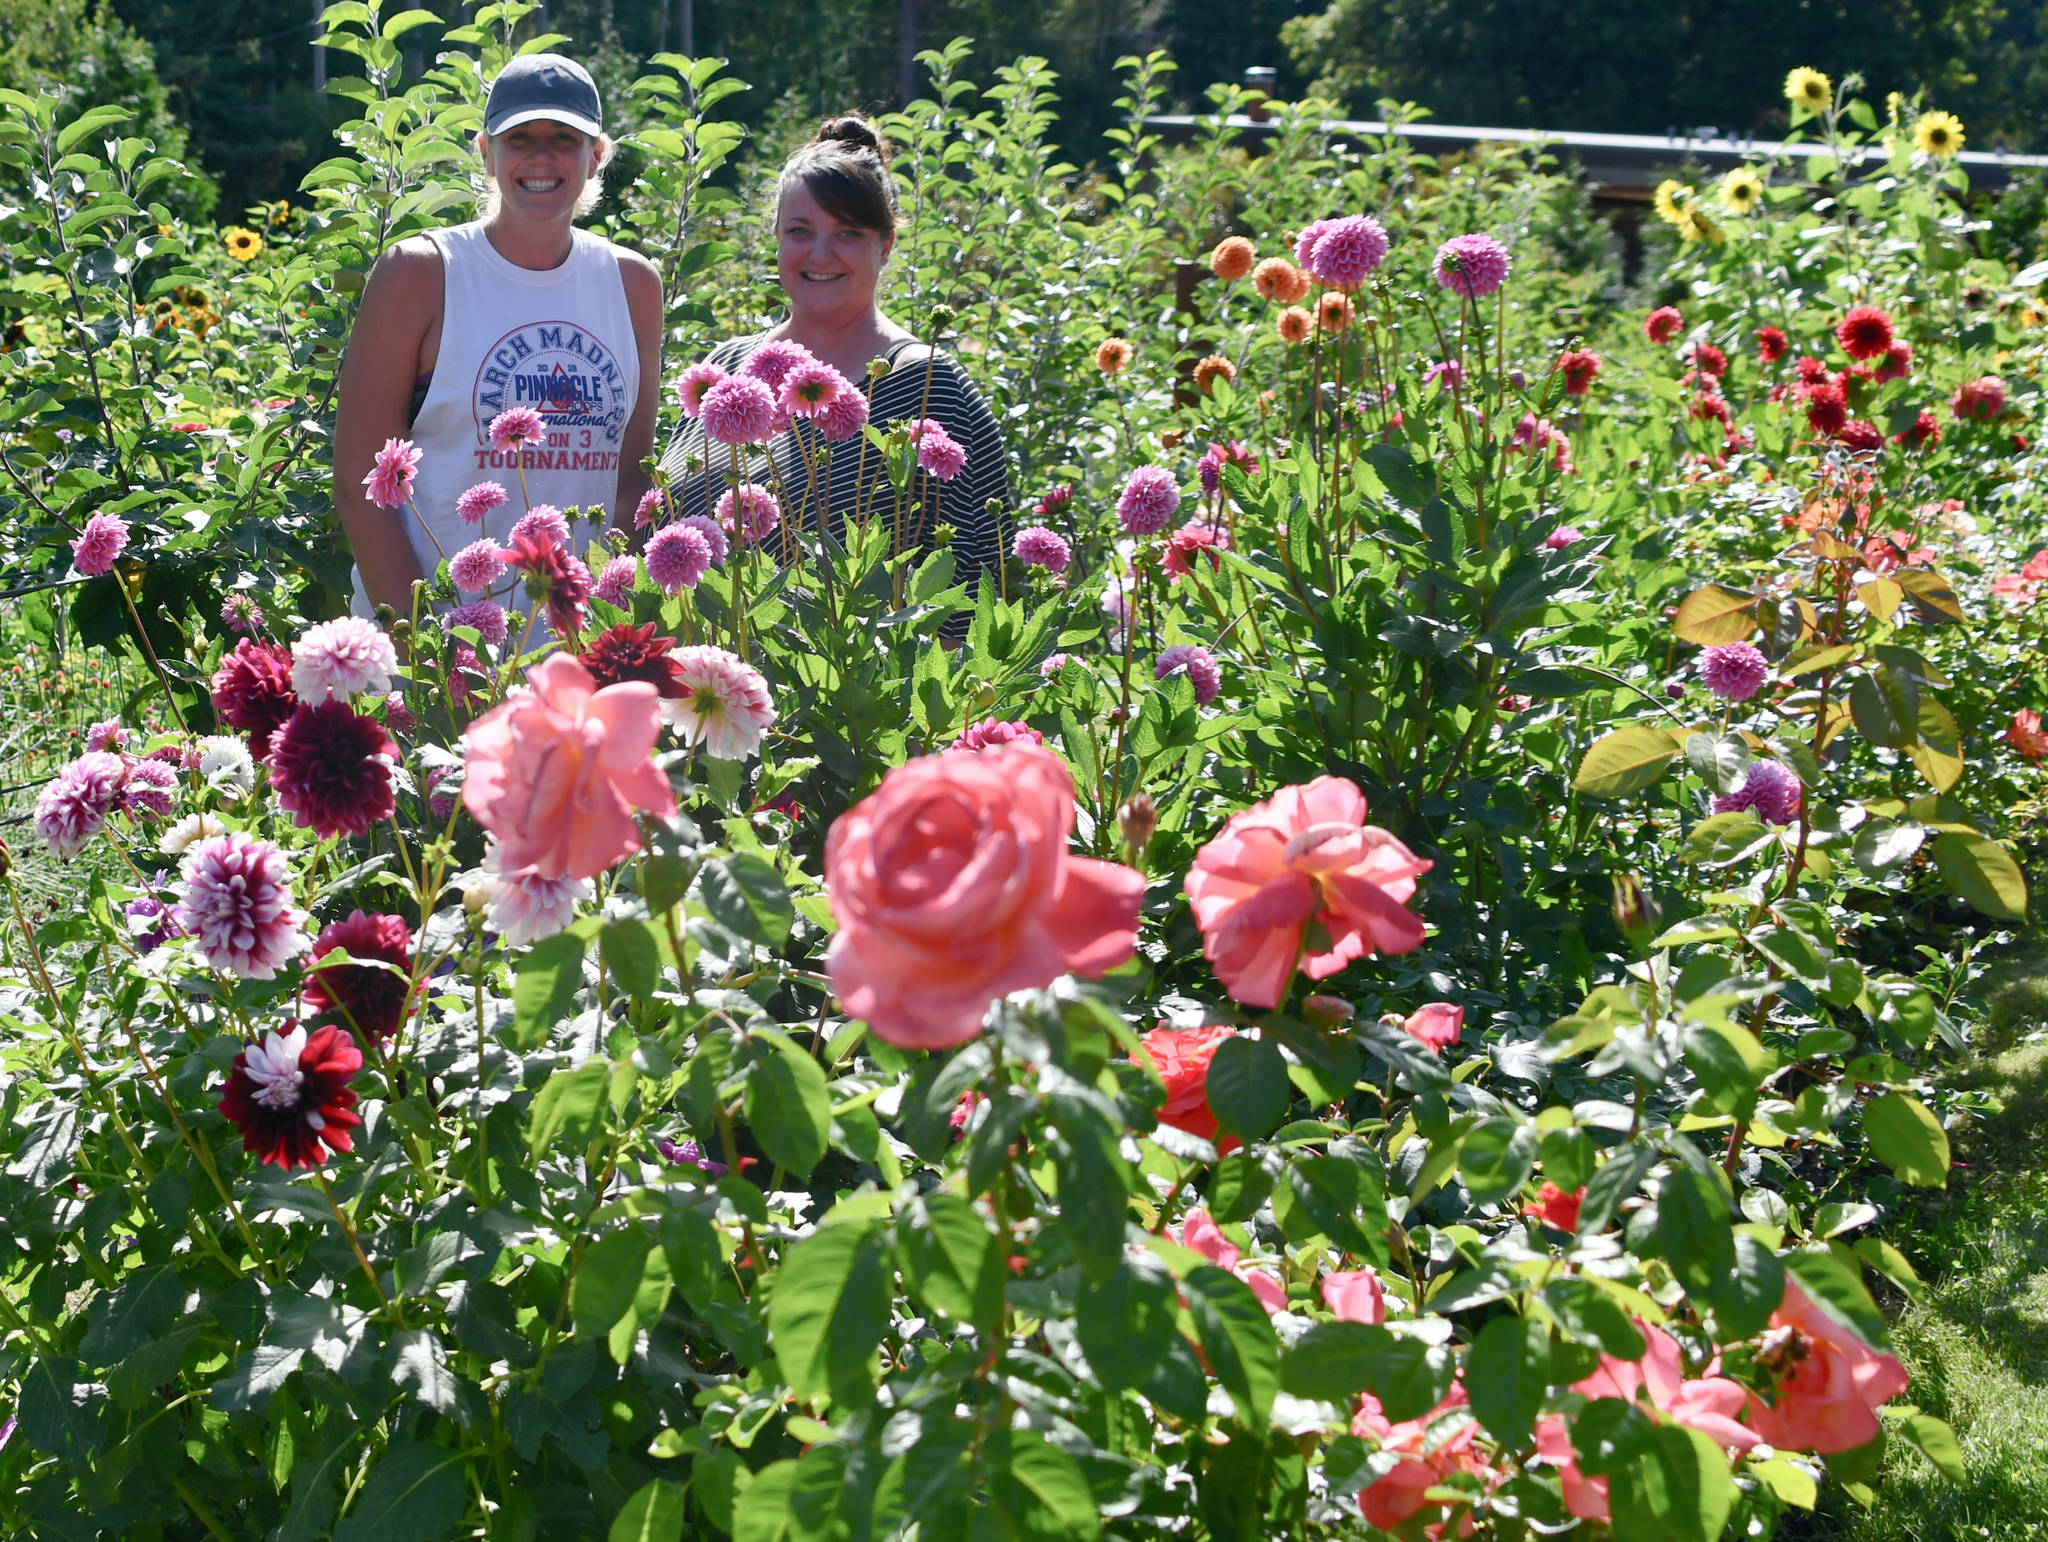 From left, Carly Fromdahl, caretaker of the MI Funny Farm, and Amy Green, owner of KIKA Flower Farm. Andy Nystrom/ staff photo